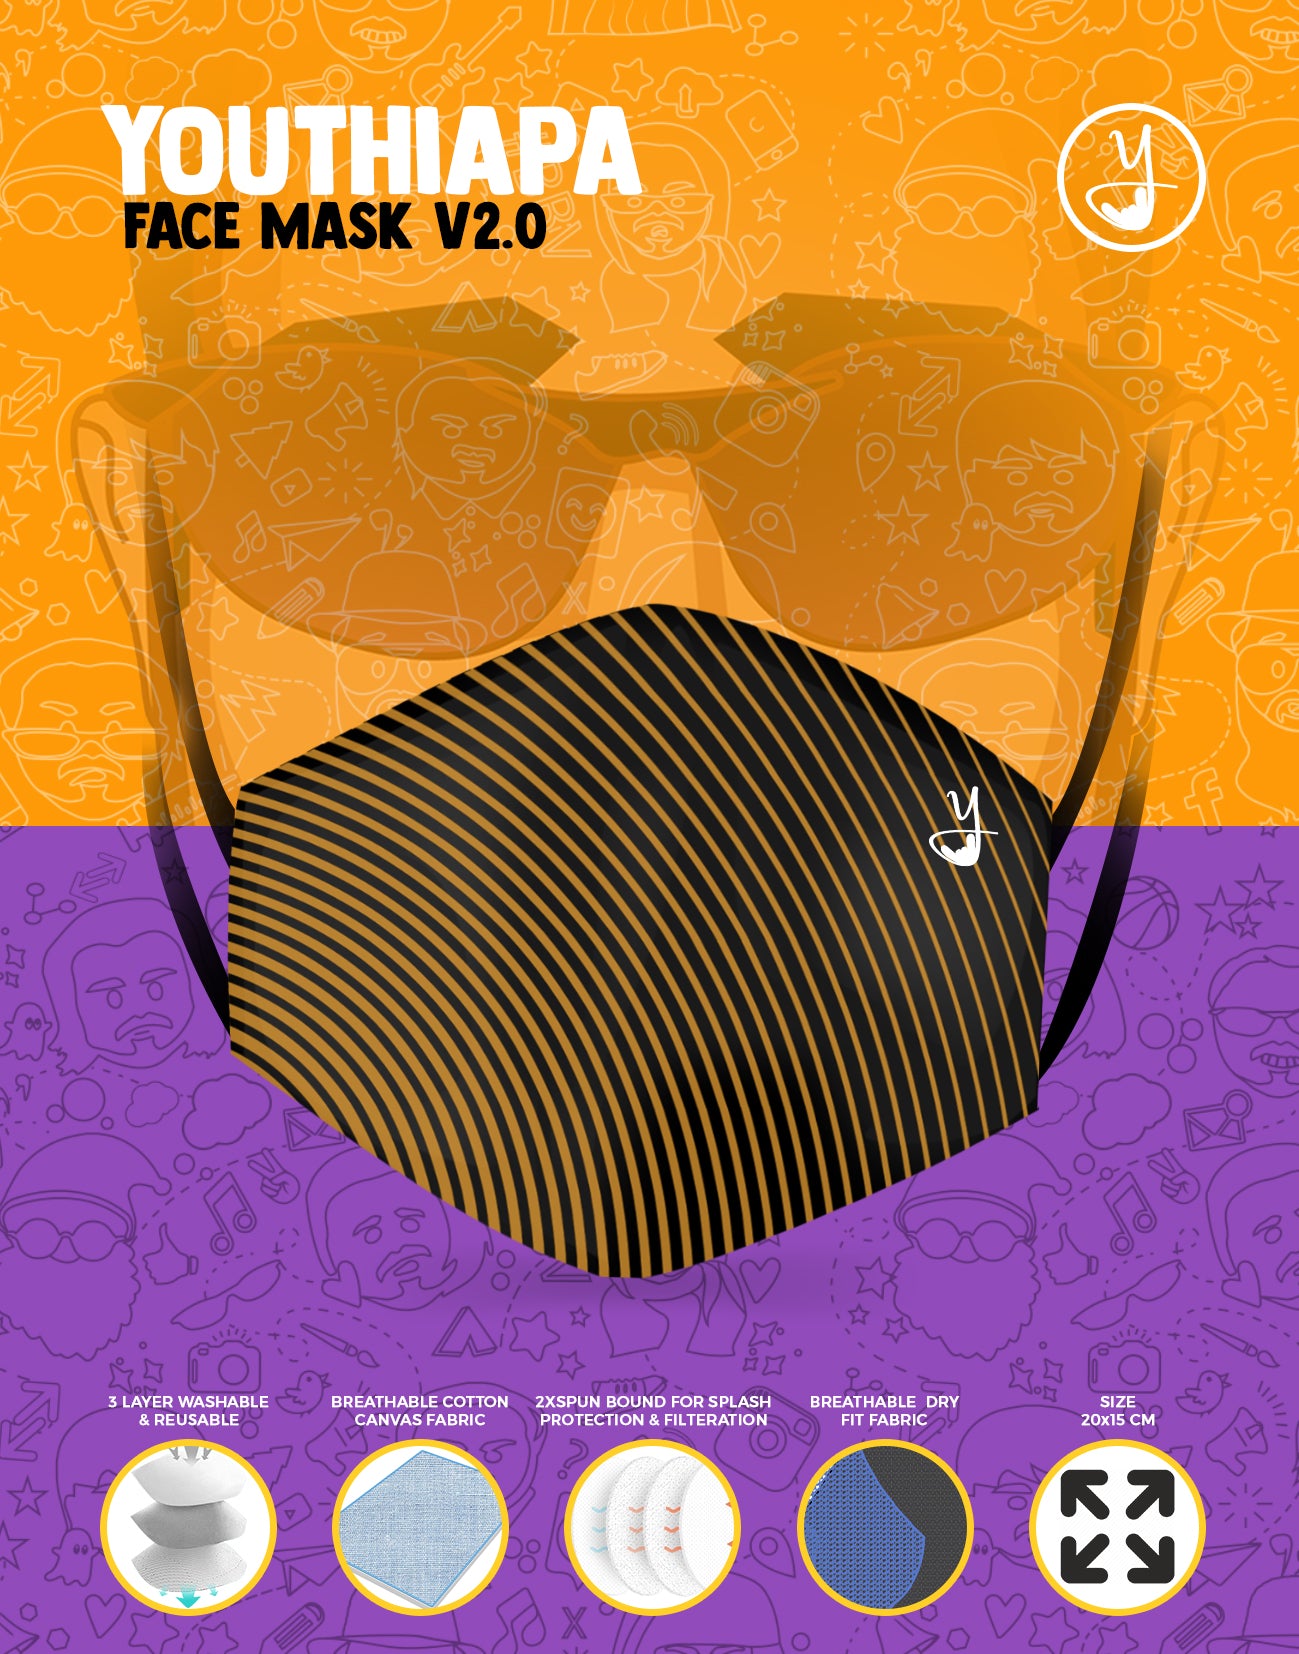 The Mask On Mask 2.0